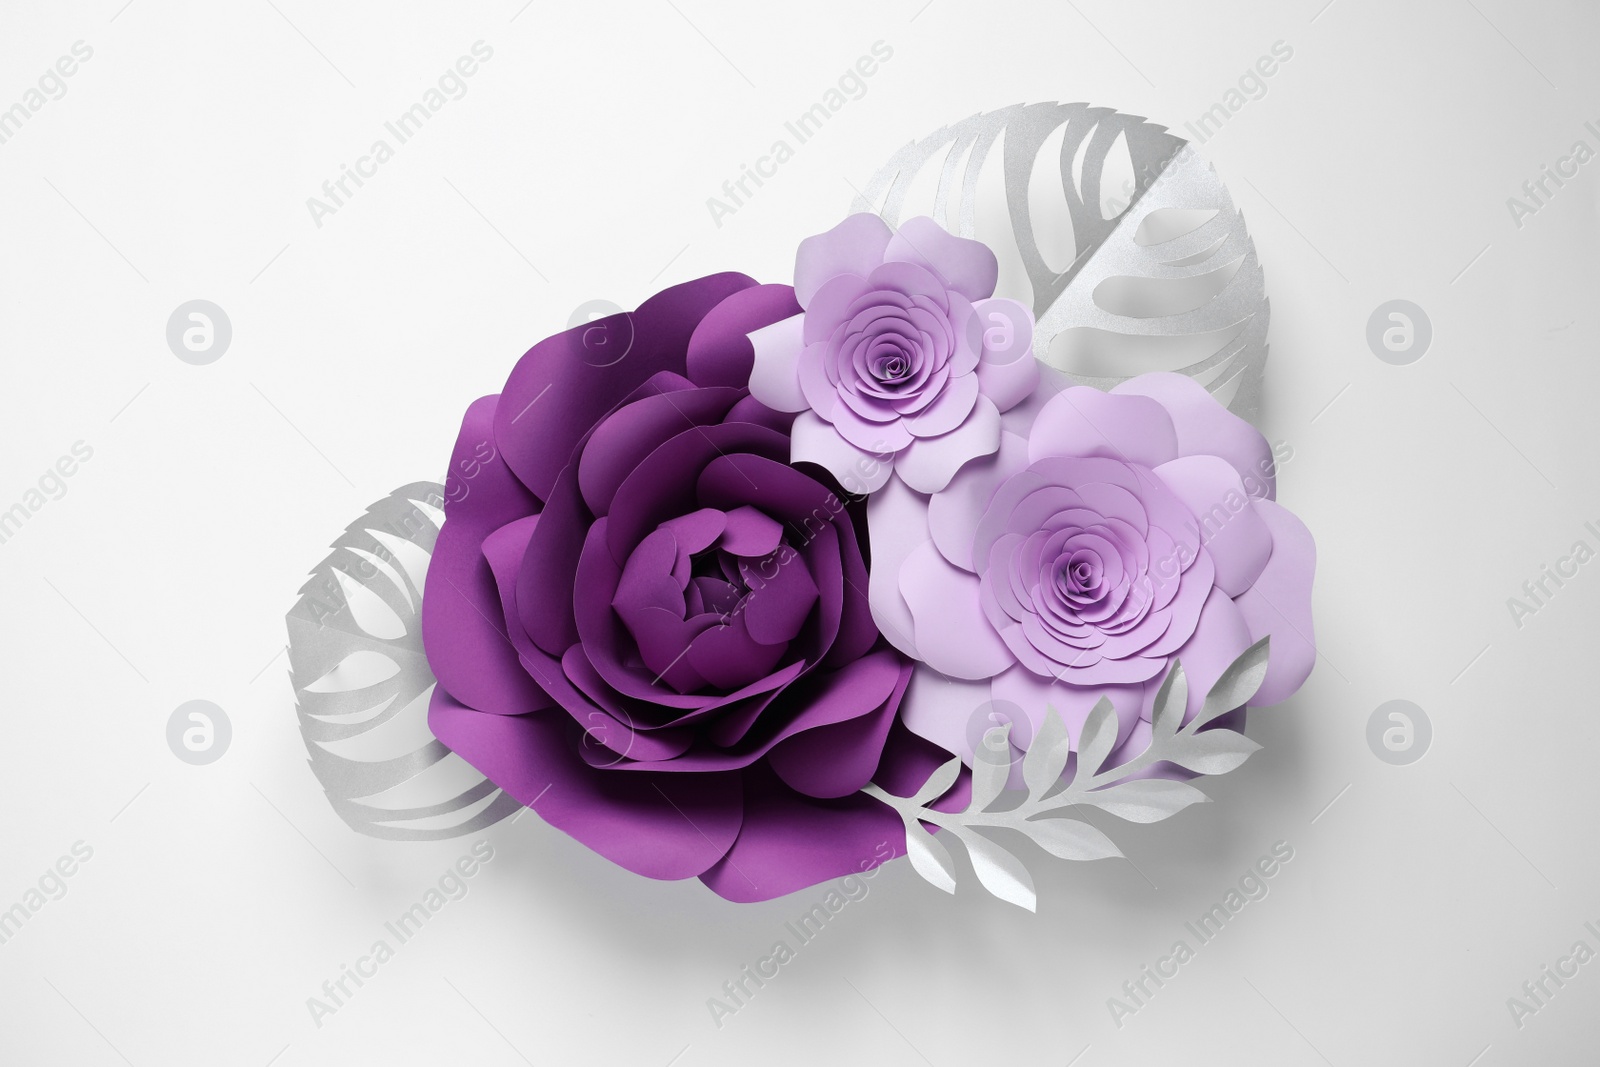 Photo of Different beautiful flowers and leaves made of paper on white background, top view